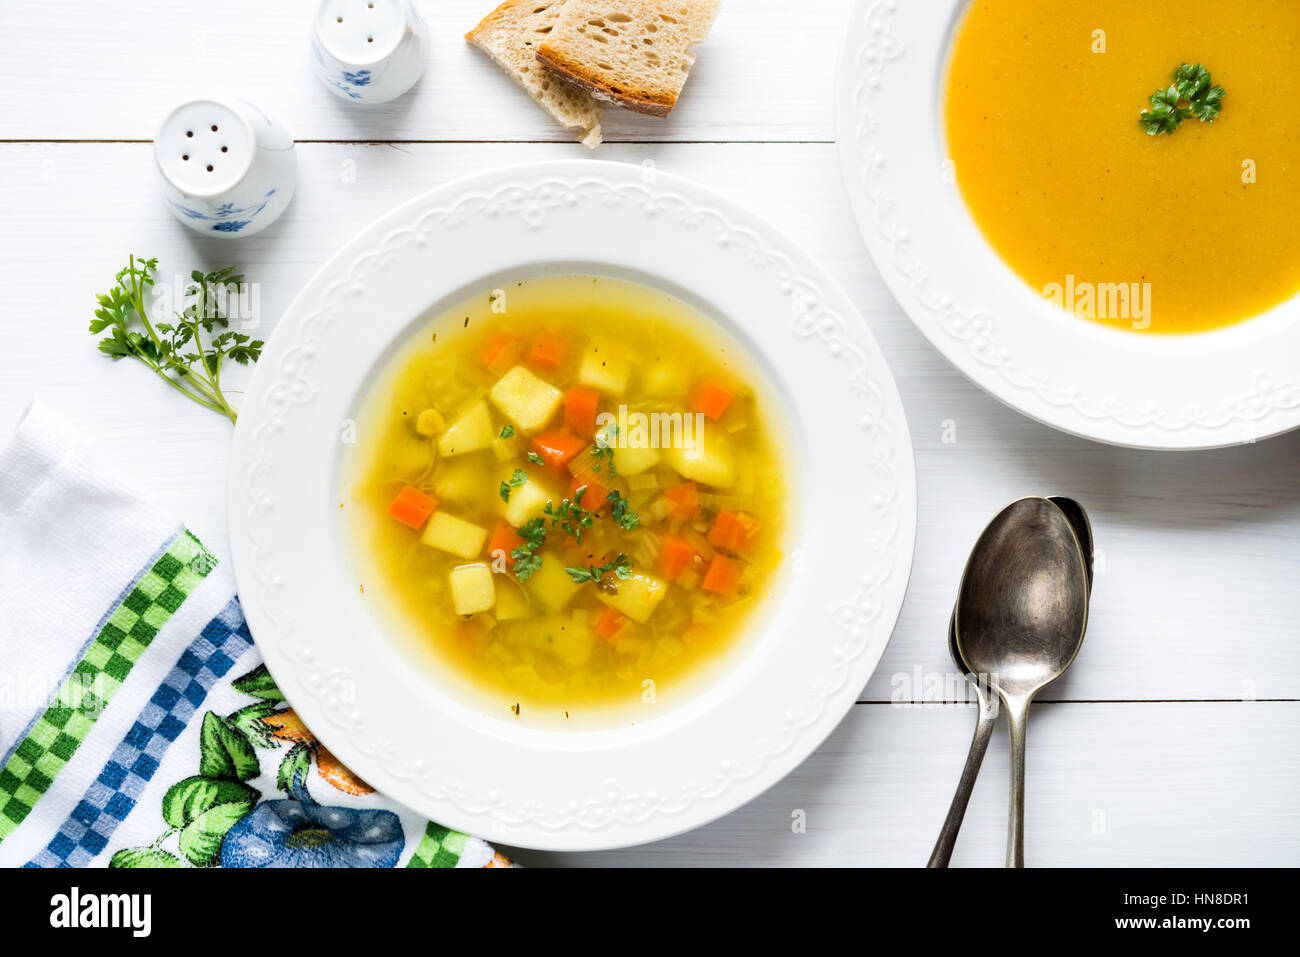 Two plates of vegetable soup and cream with bread fresh parsley, spoons, salt and pepper shakers on white wooden table Stock Photo